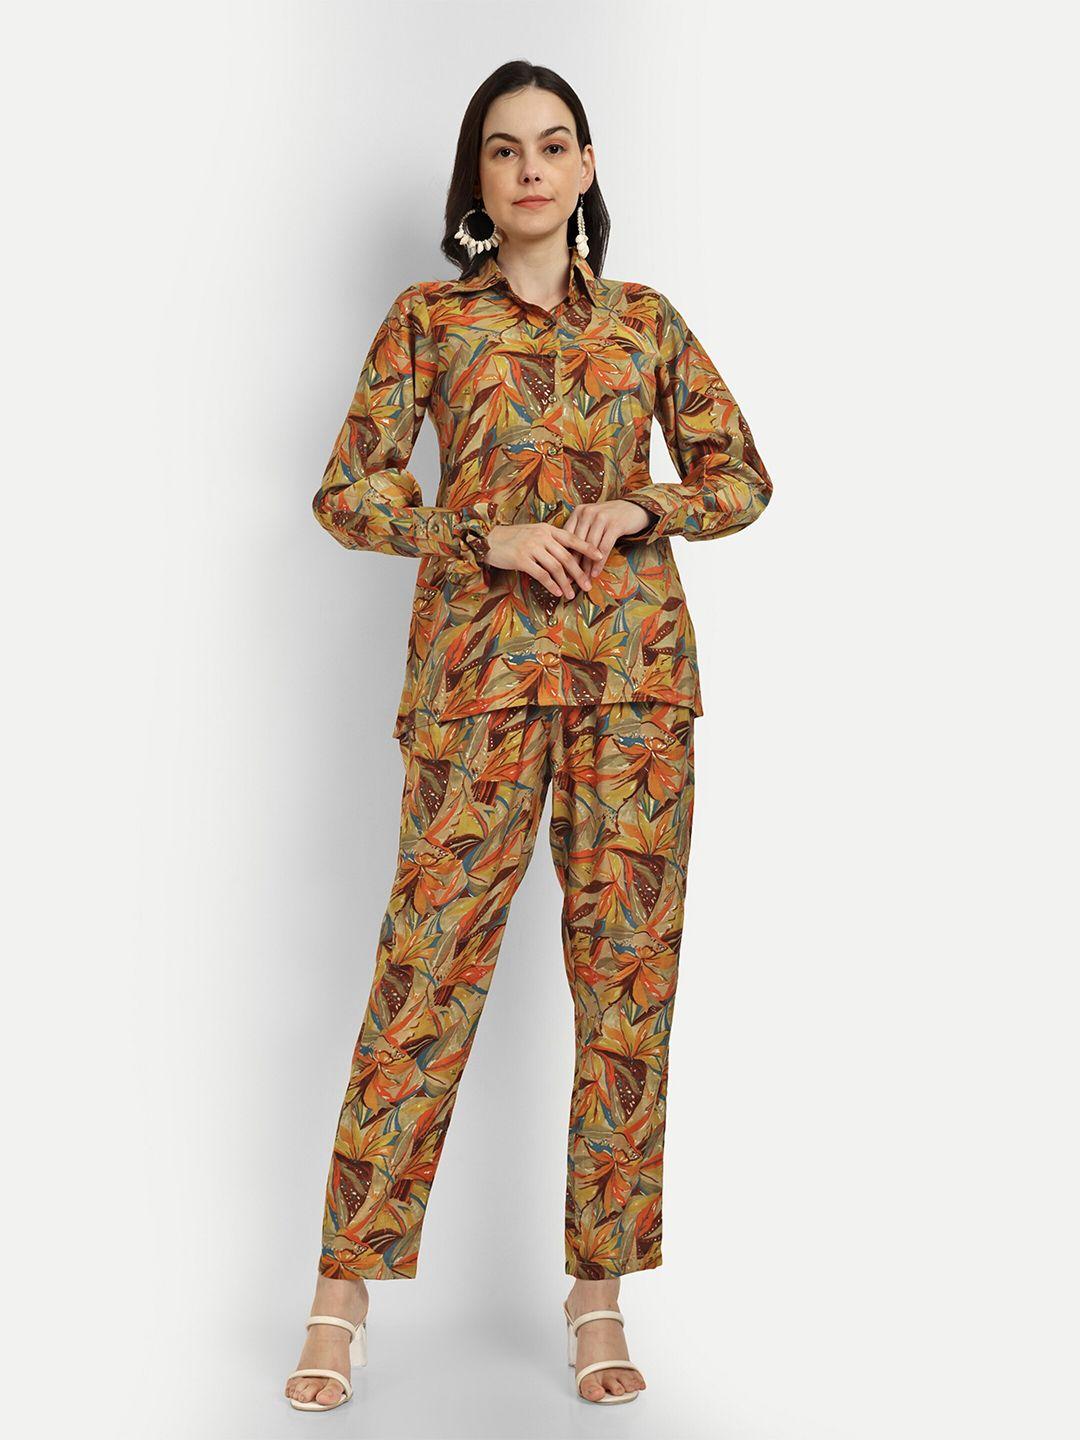 shinisha floral printed shirt with trouser co-ords with scrunchie